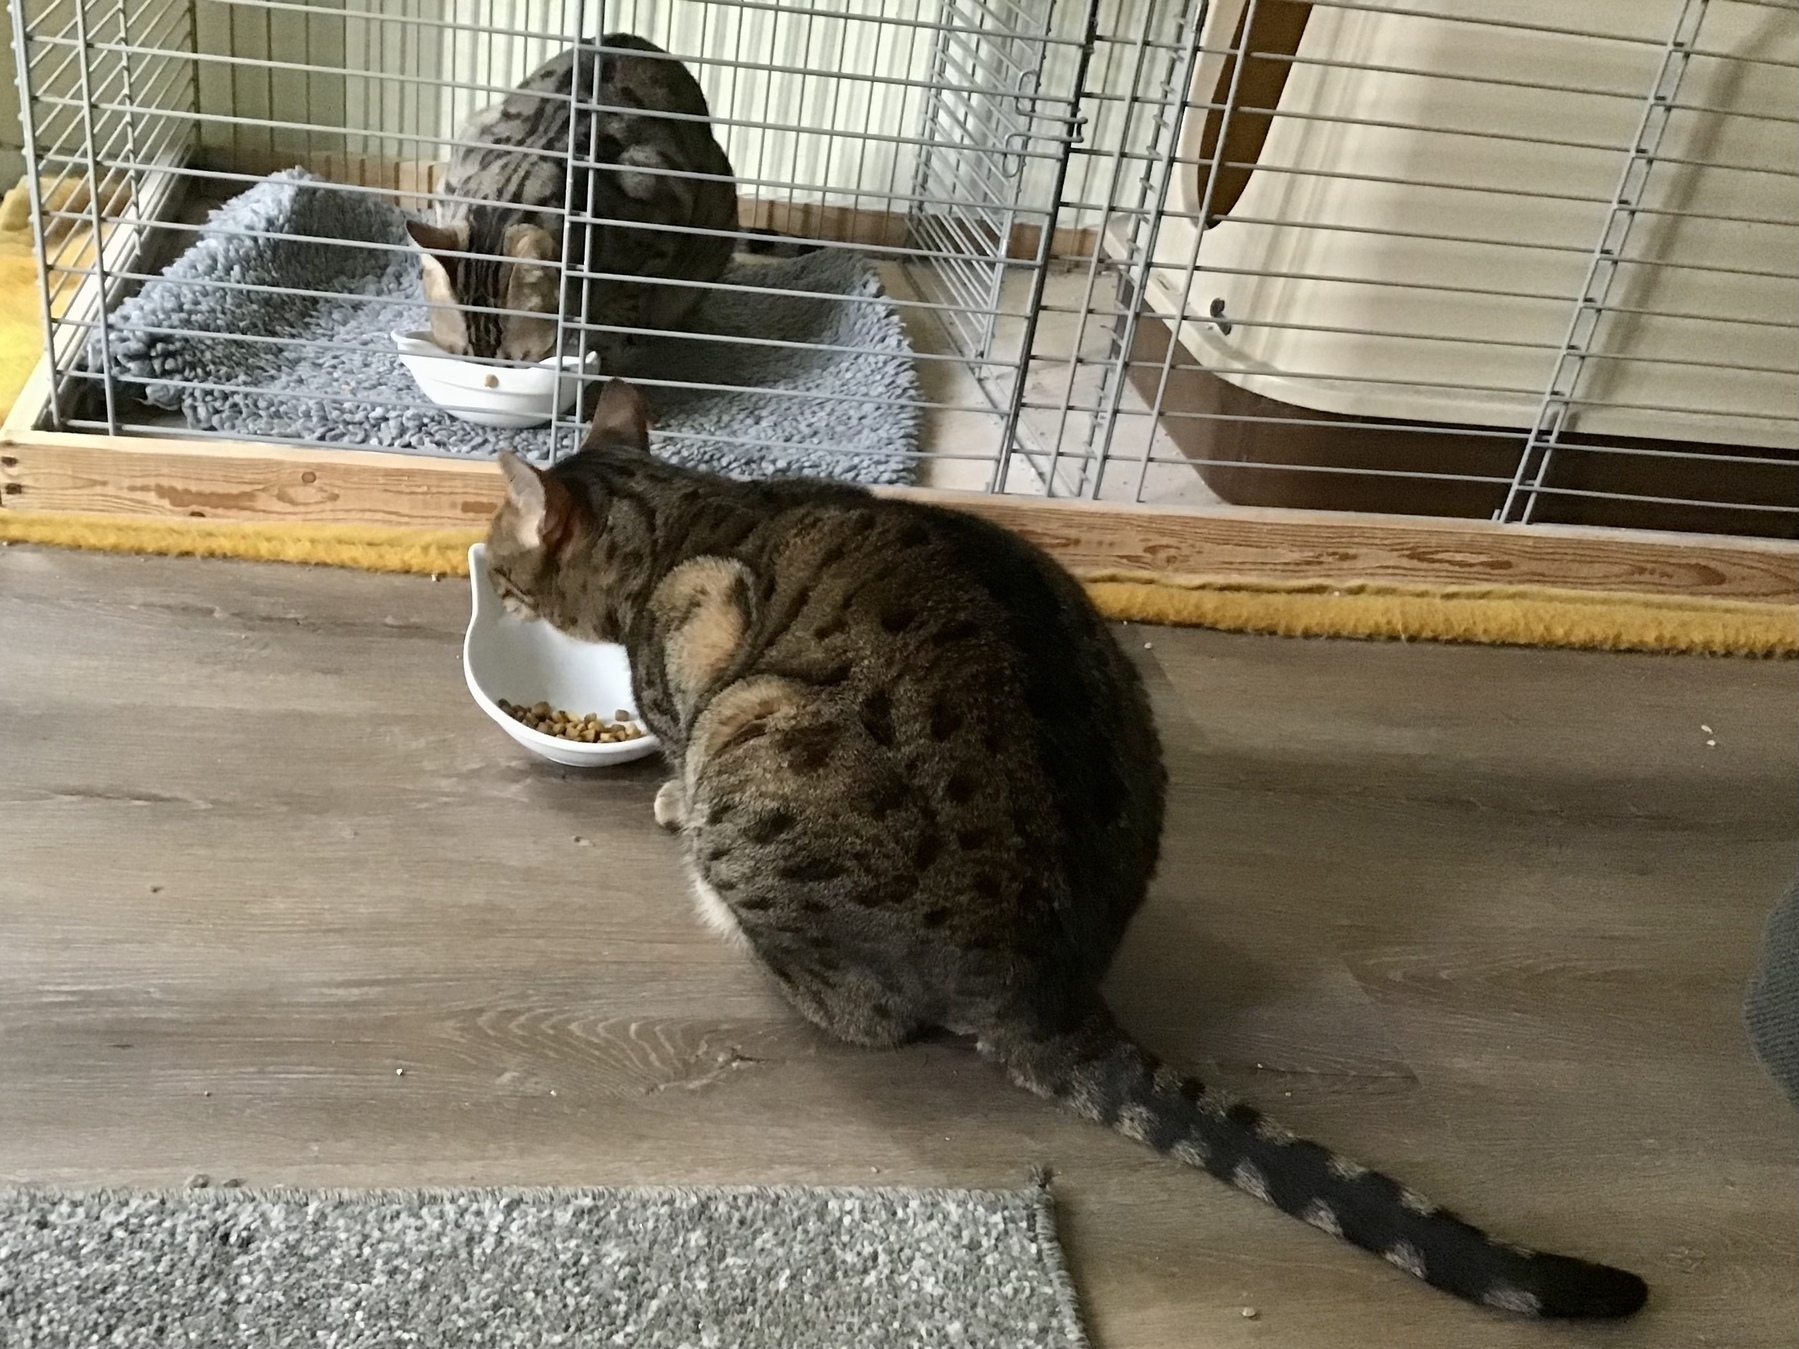 two cats eating, one in a cage, one in front of a cage